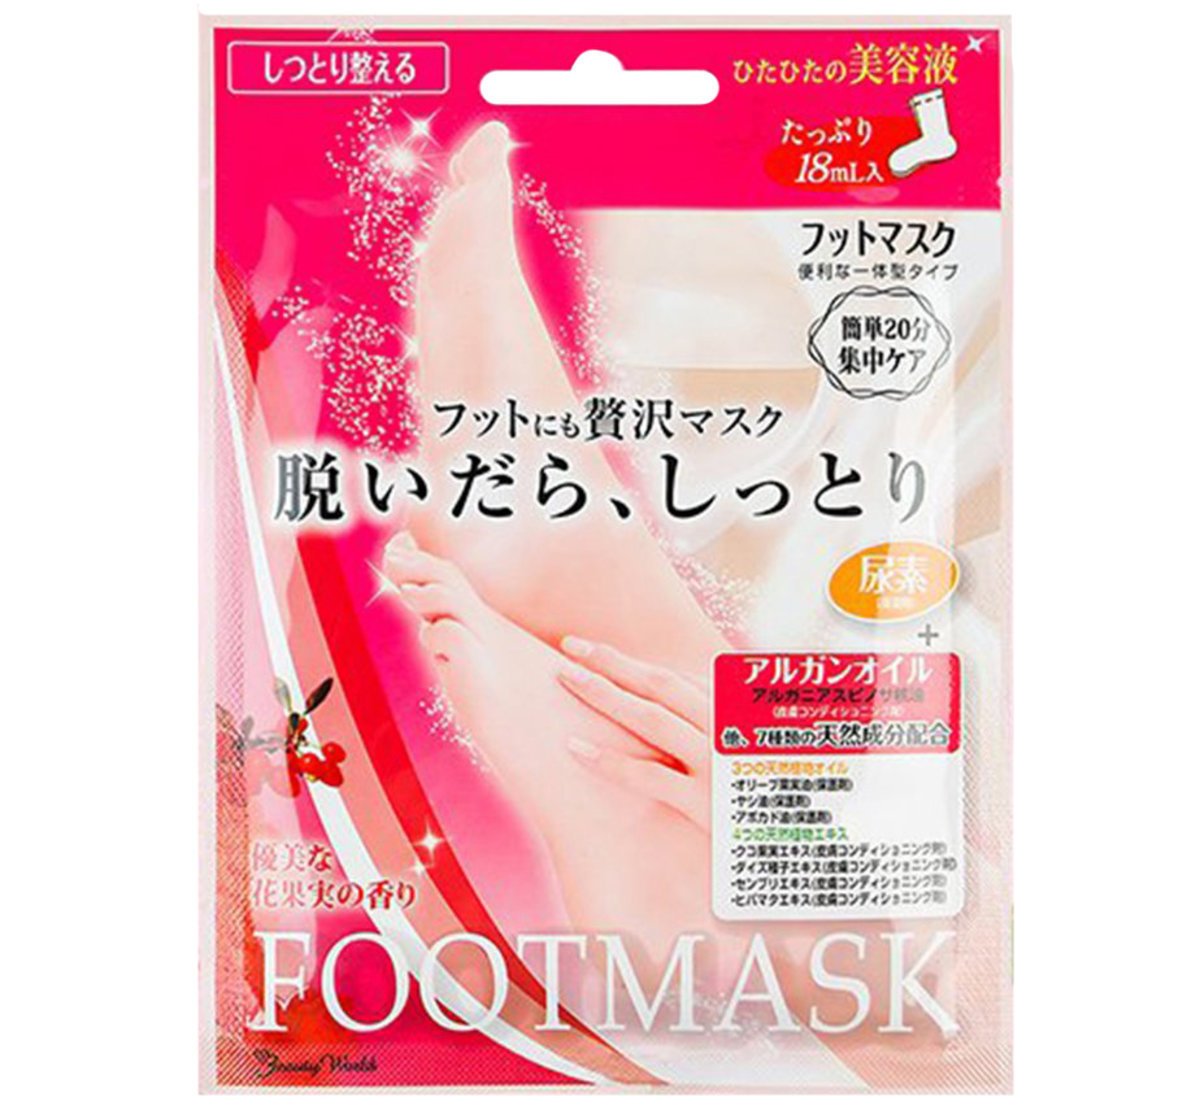 Lucky Trendy Natural Foot Mask 18ml - 1 pair